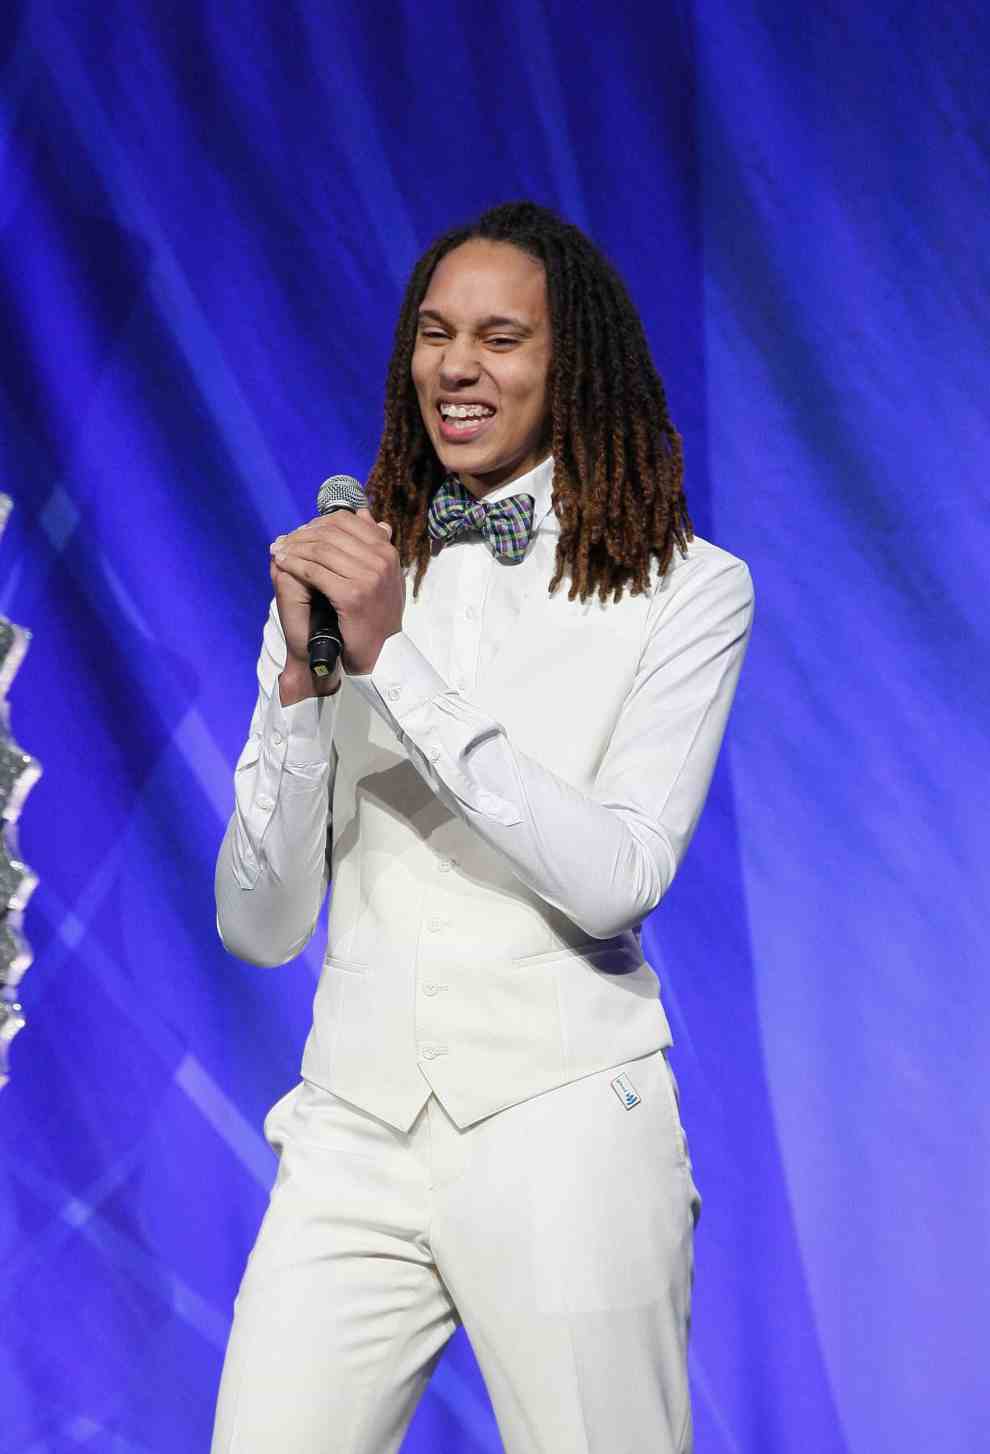 Brittney Griner accpeta an award during the 24th Annual GLAAD Media Awards at the Hilton San Francisco - Union Square on May 11, 2013 in San Francisco, California.